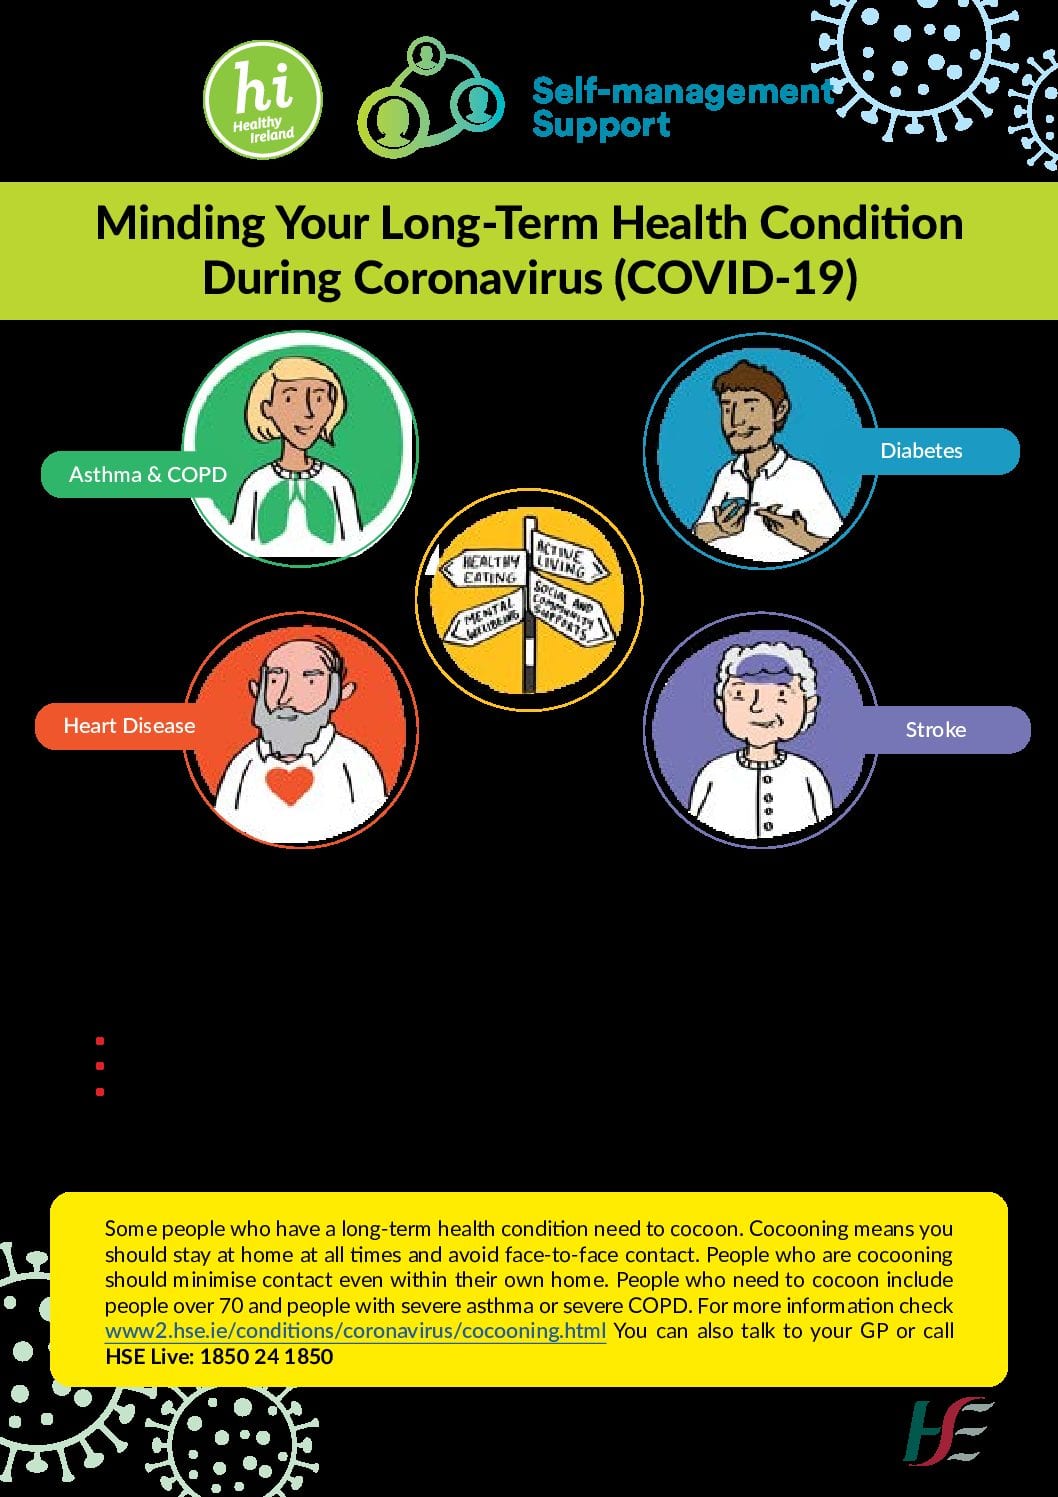 How to Manage Your Long-Term Condition During COVID-19